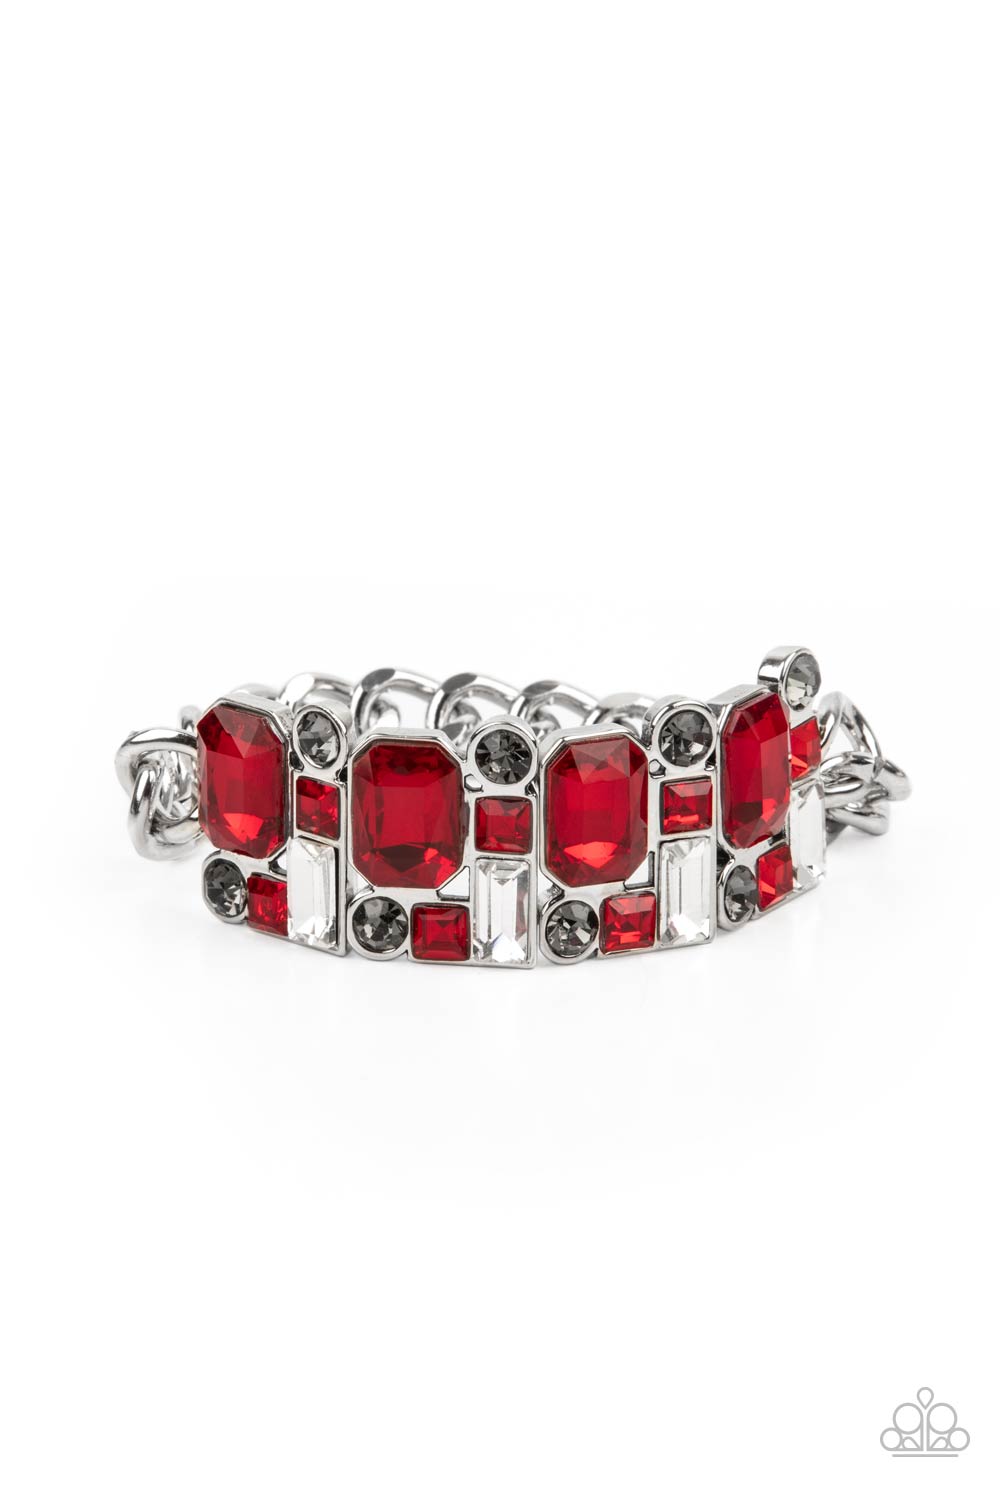 Urban Crest Red Bracelet - Paparazzi Accessories  A mismatched collision of red, smoky, and white rhinestone encrusted frames are threaded along a stretchy band that attaches to a chunky strand of silver chain, creating jaw-dropping dazzle across the front of the wrist.  All Paparazzi Accessories are lead free and nickel free!   Sold as one individual bracelet.